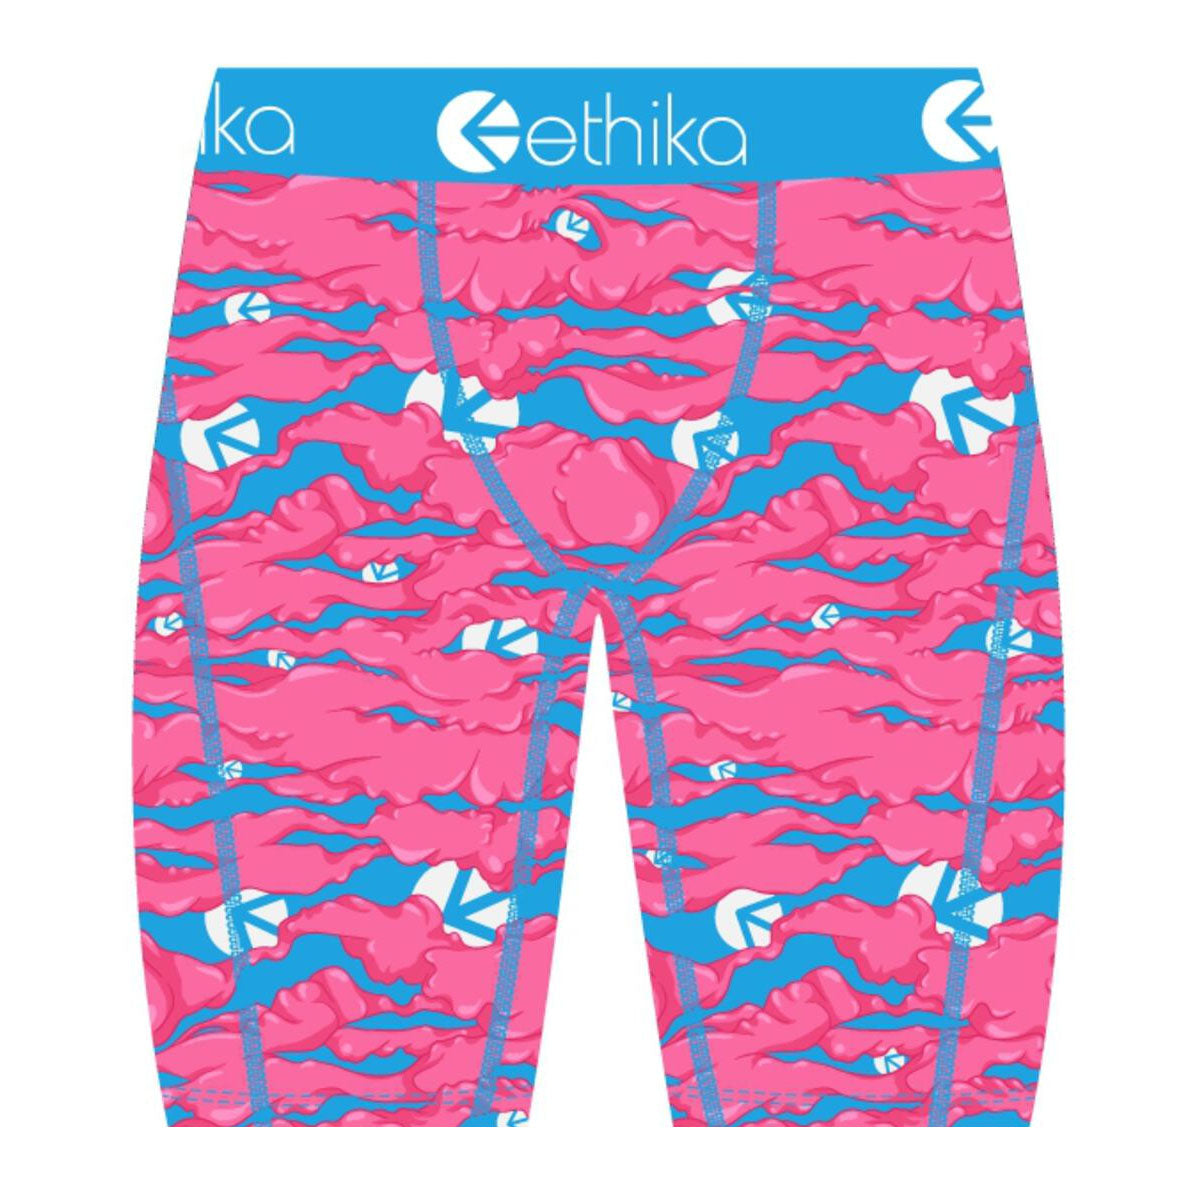 Multicolor Ethika Underwear L South Africa Factory Outlet - Ethika